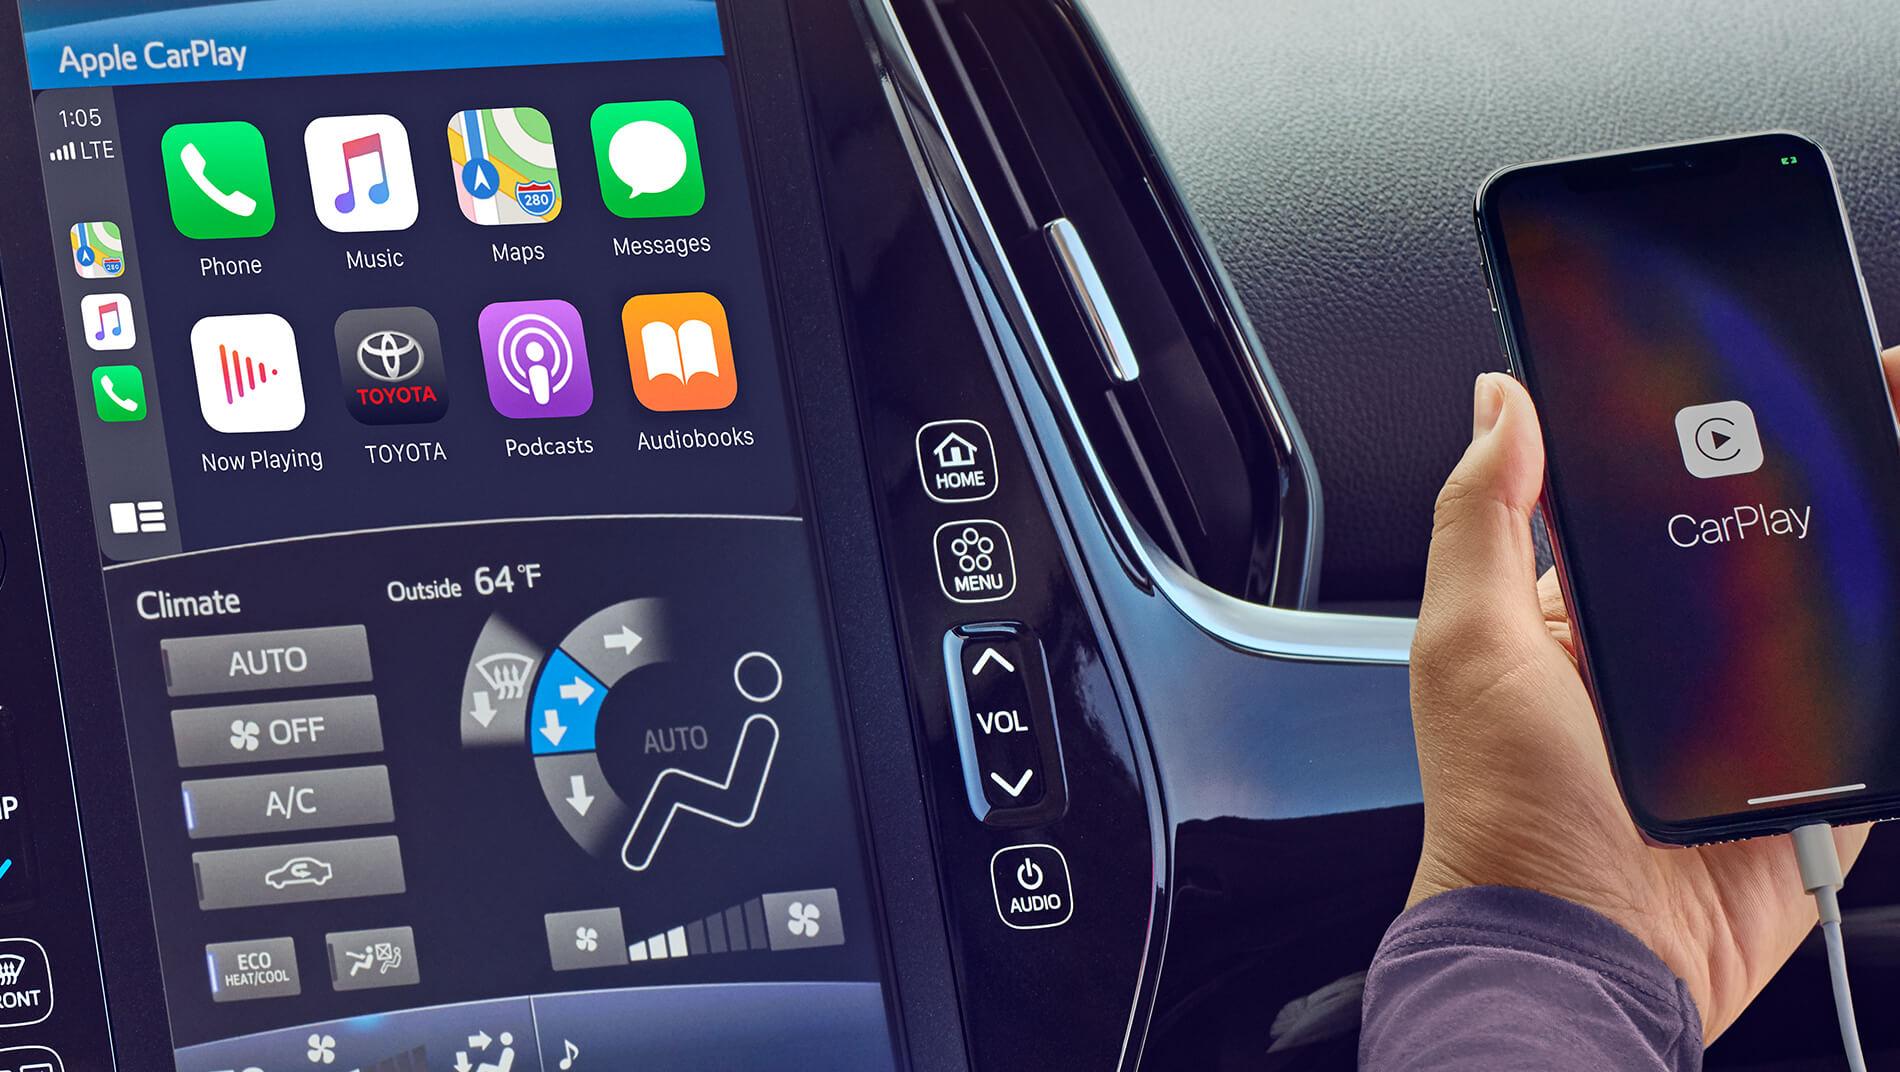 Toyota Prius supports Apple CarPlay and Android Auto and connects to your phone